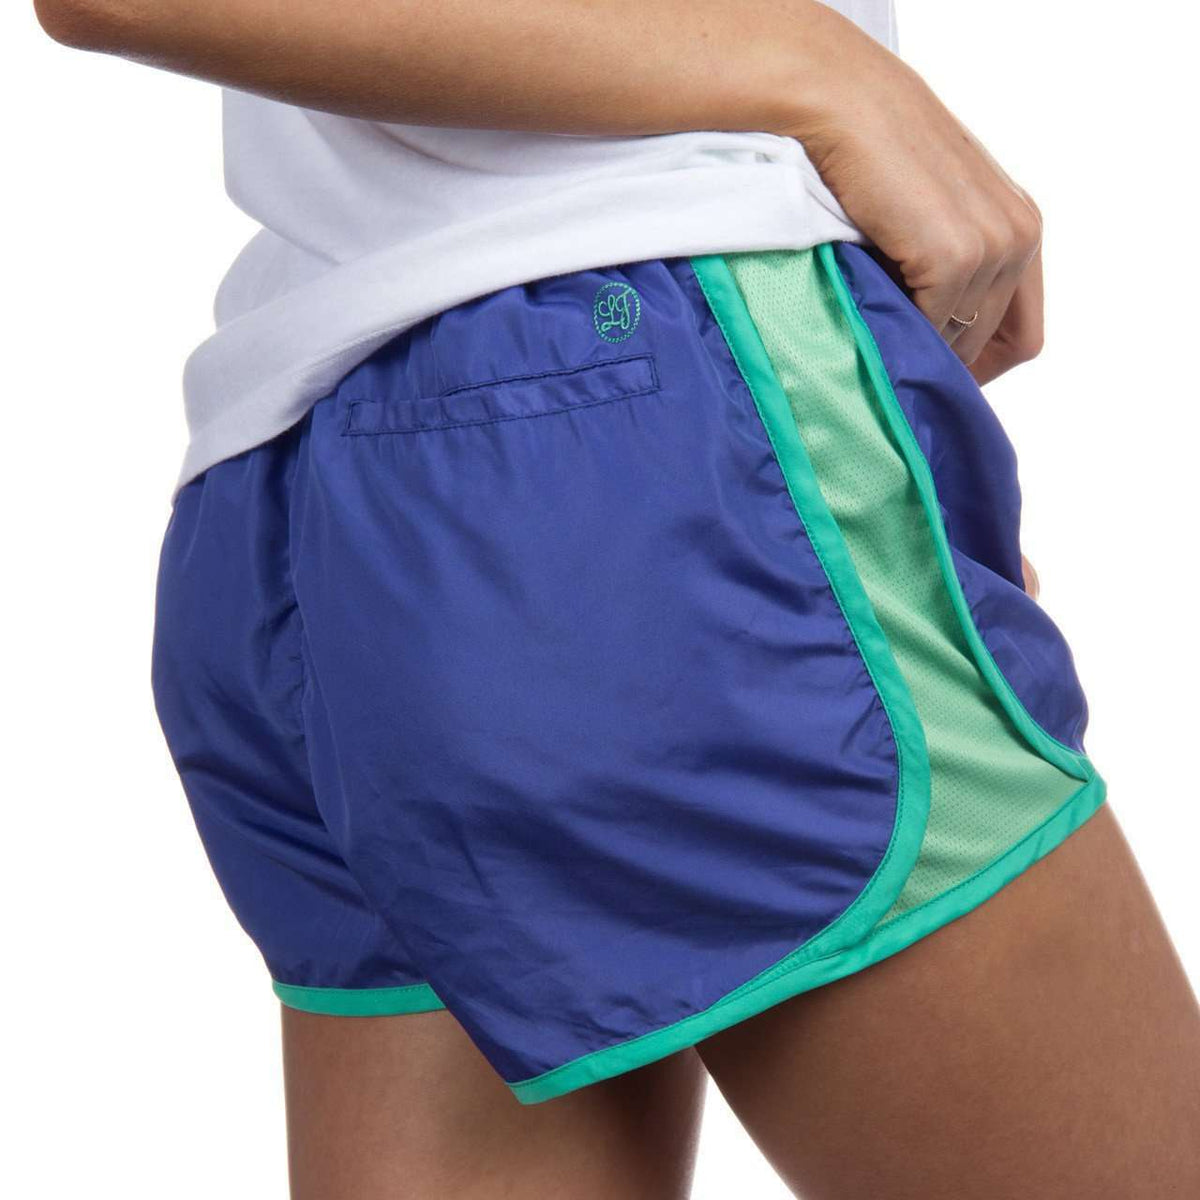 Preptec Athletic Shorts in Periwinkle by Lauren James - Country Club Prep